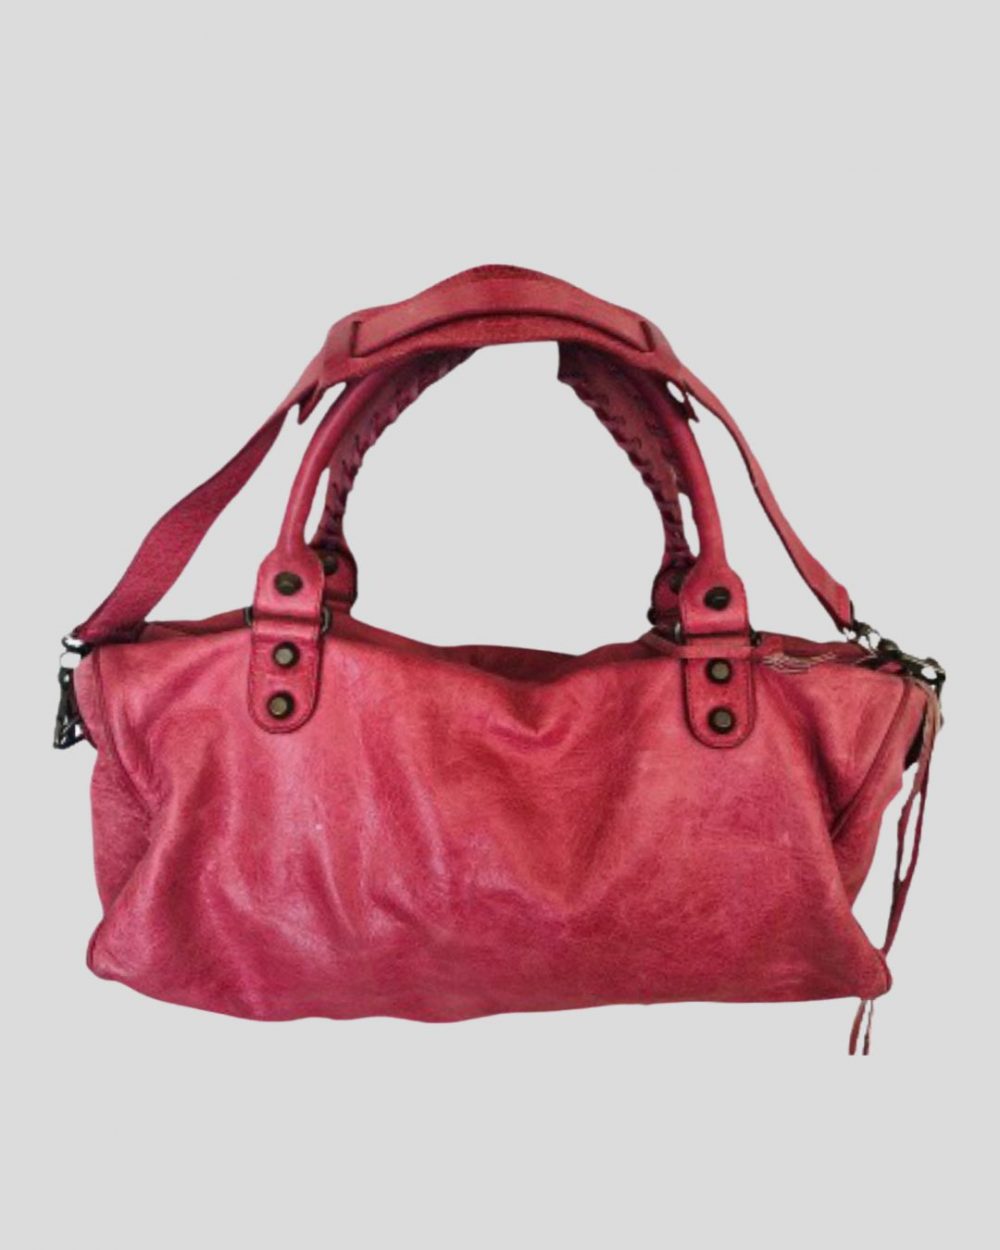 PINK-LEATHER-MOTORCYCLE-BAG- ONROTATE